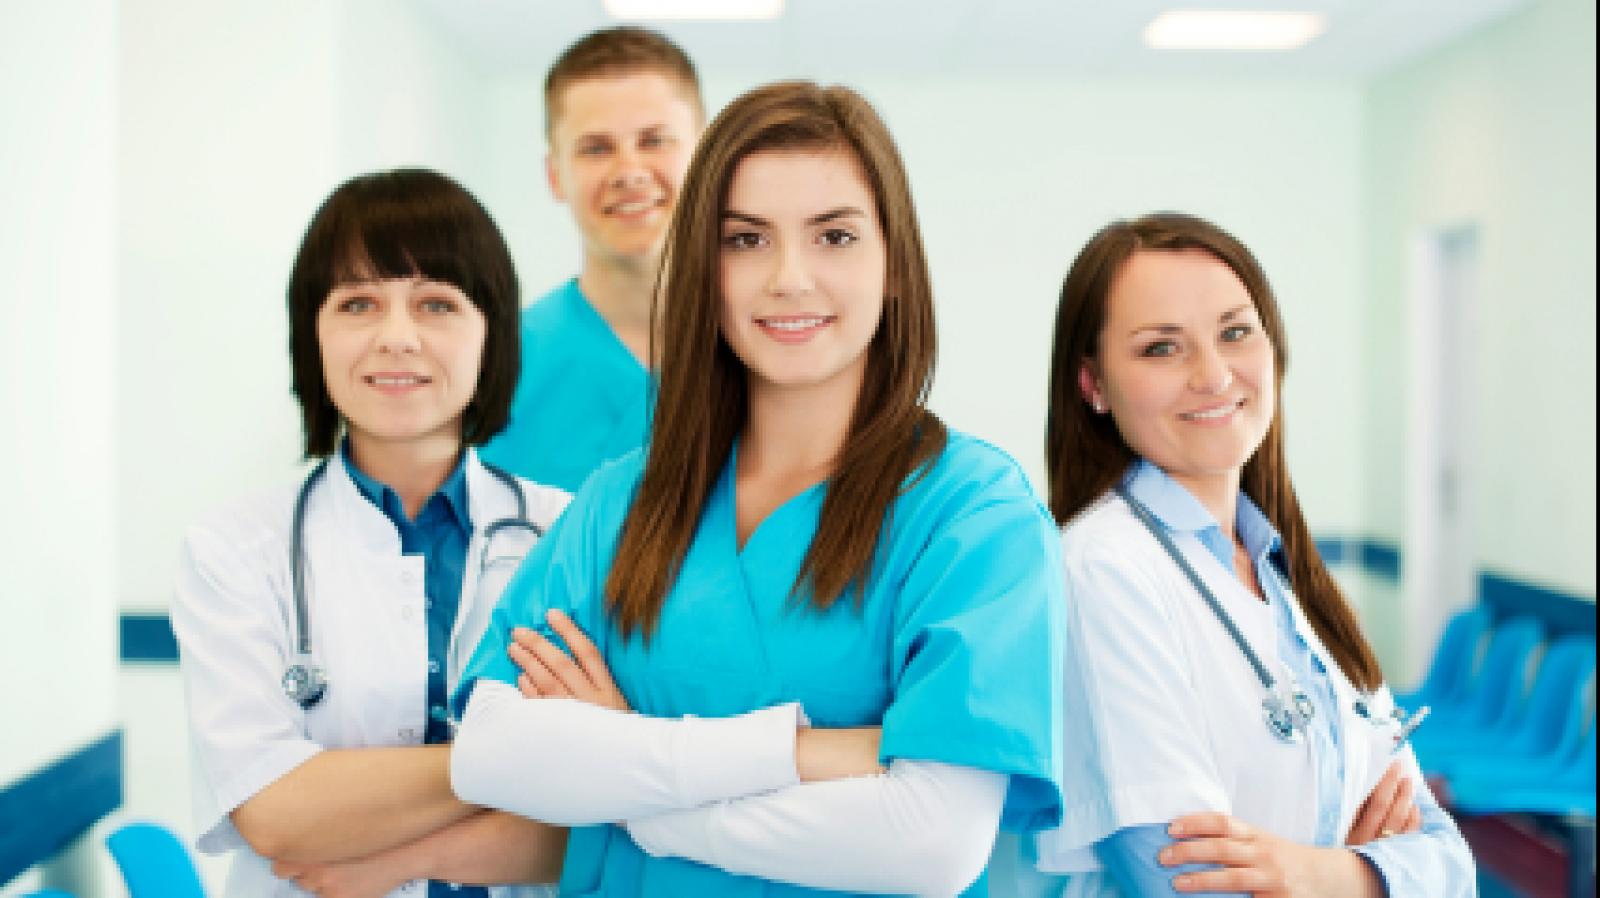 Four healthcare professionals in scrubs looking to camera with their arms crossed .